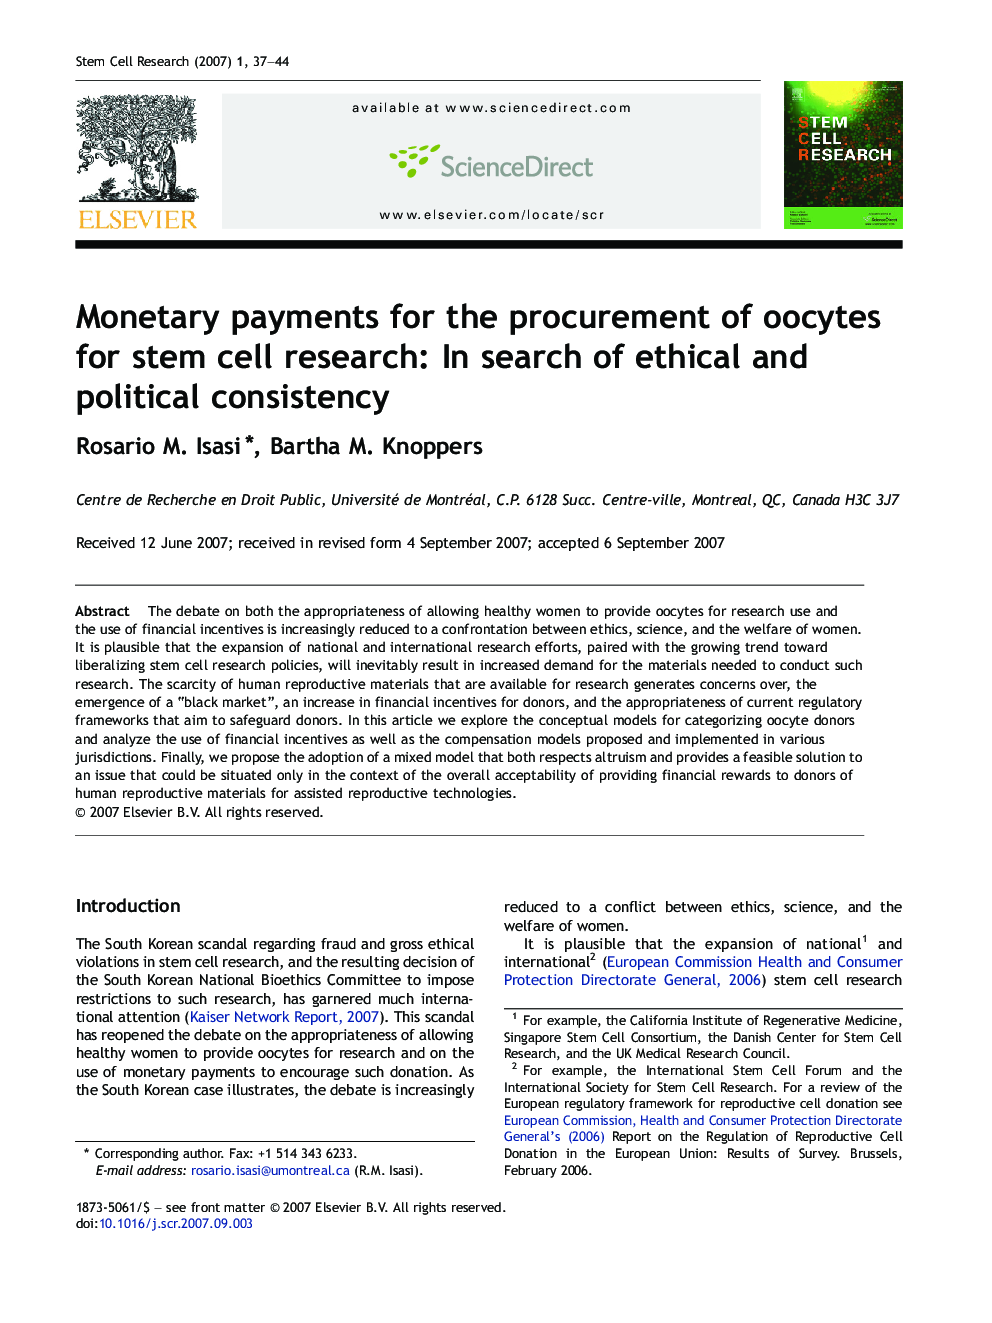 Monetary payments for the procurement of oocytes for stem cell research: In search of ethical and political consistency